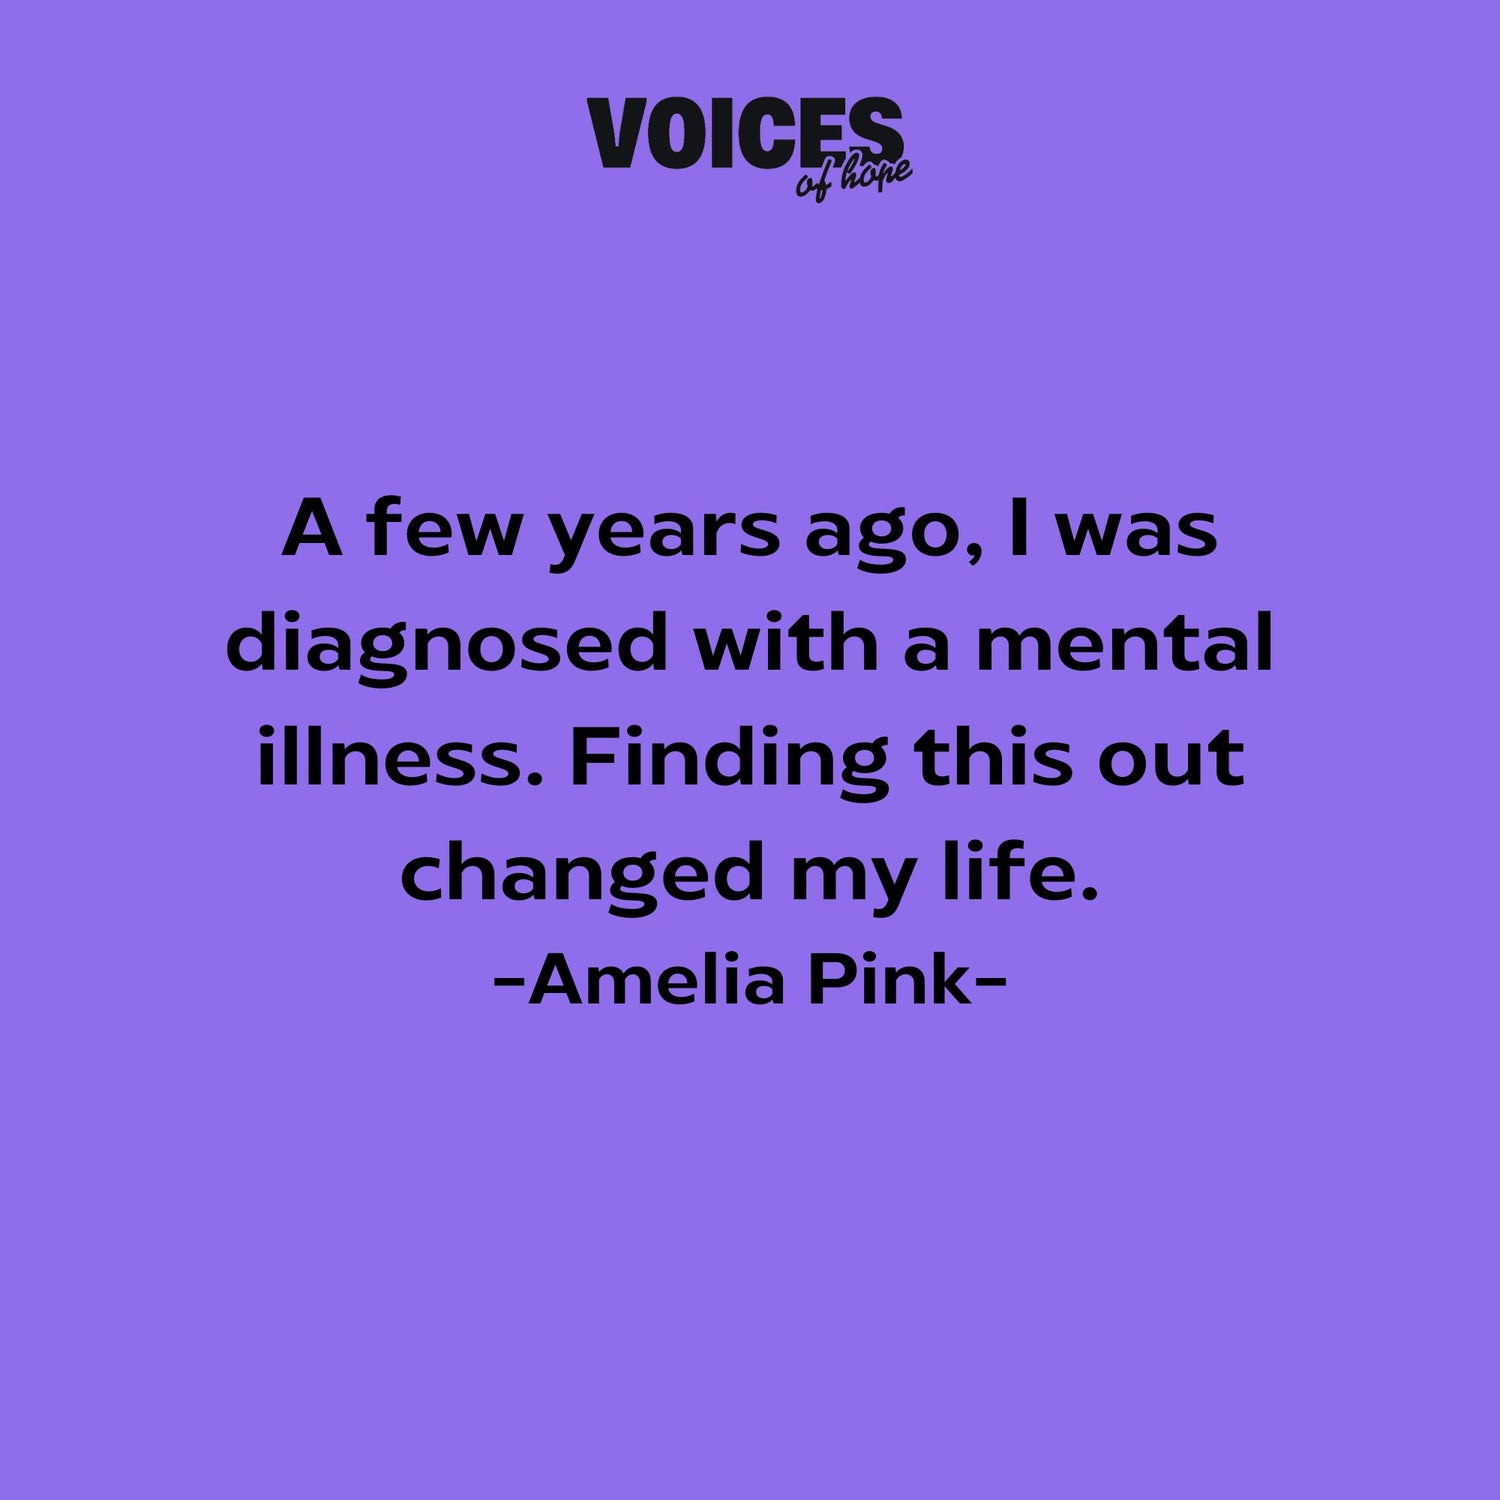 Purple background with black writing that reads: "a few years ago, I was diagnosed with a mental illness. Finding this out changed my life. Amelia Pink."